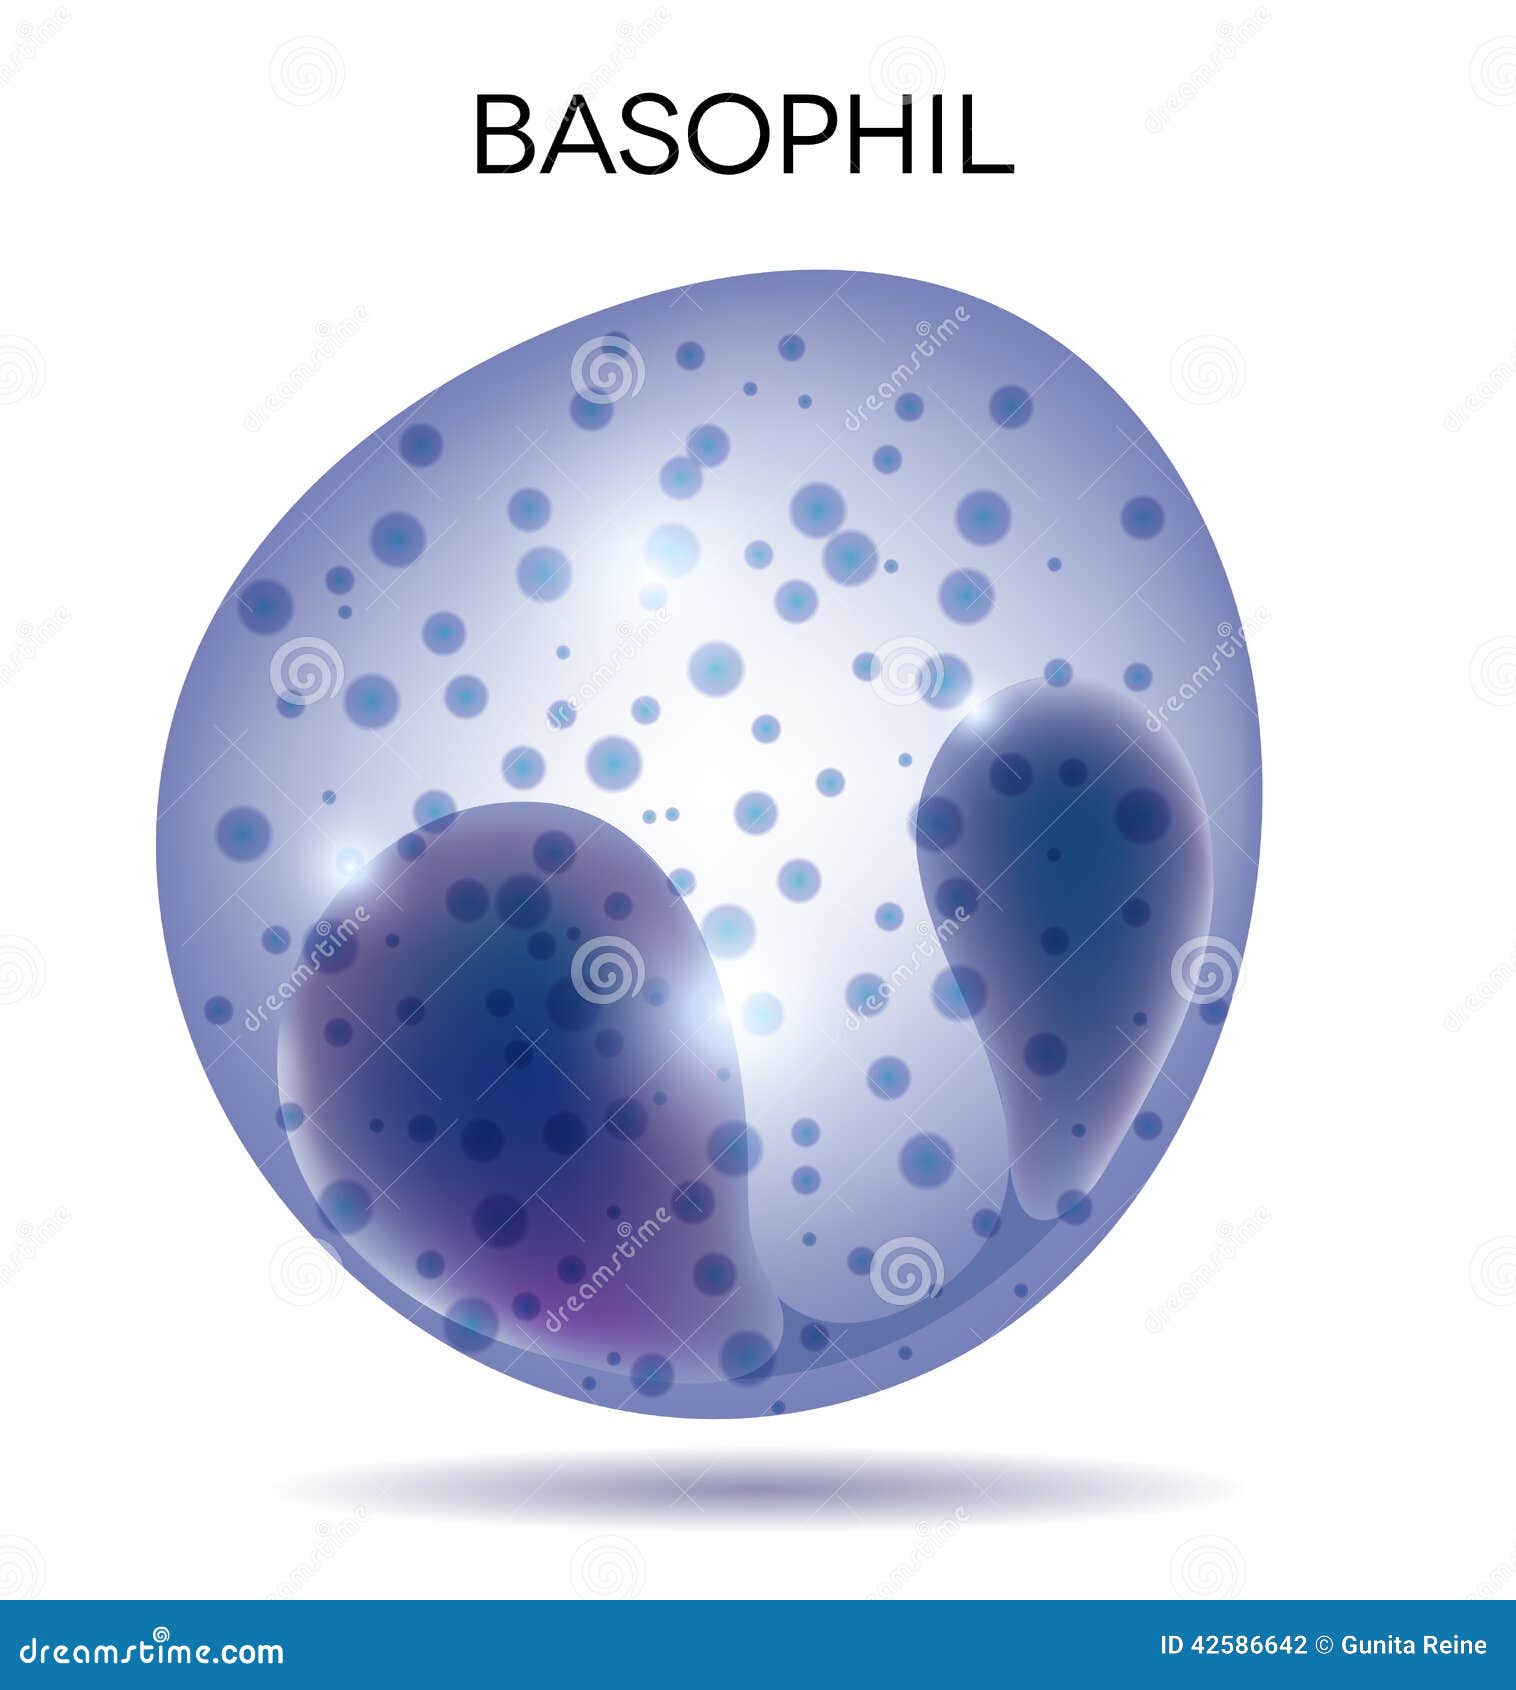 Basophil Cartoons, Illustrations & Vector Stock Images - 118 Pictures